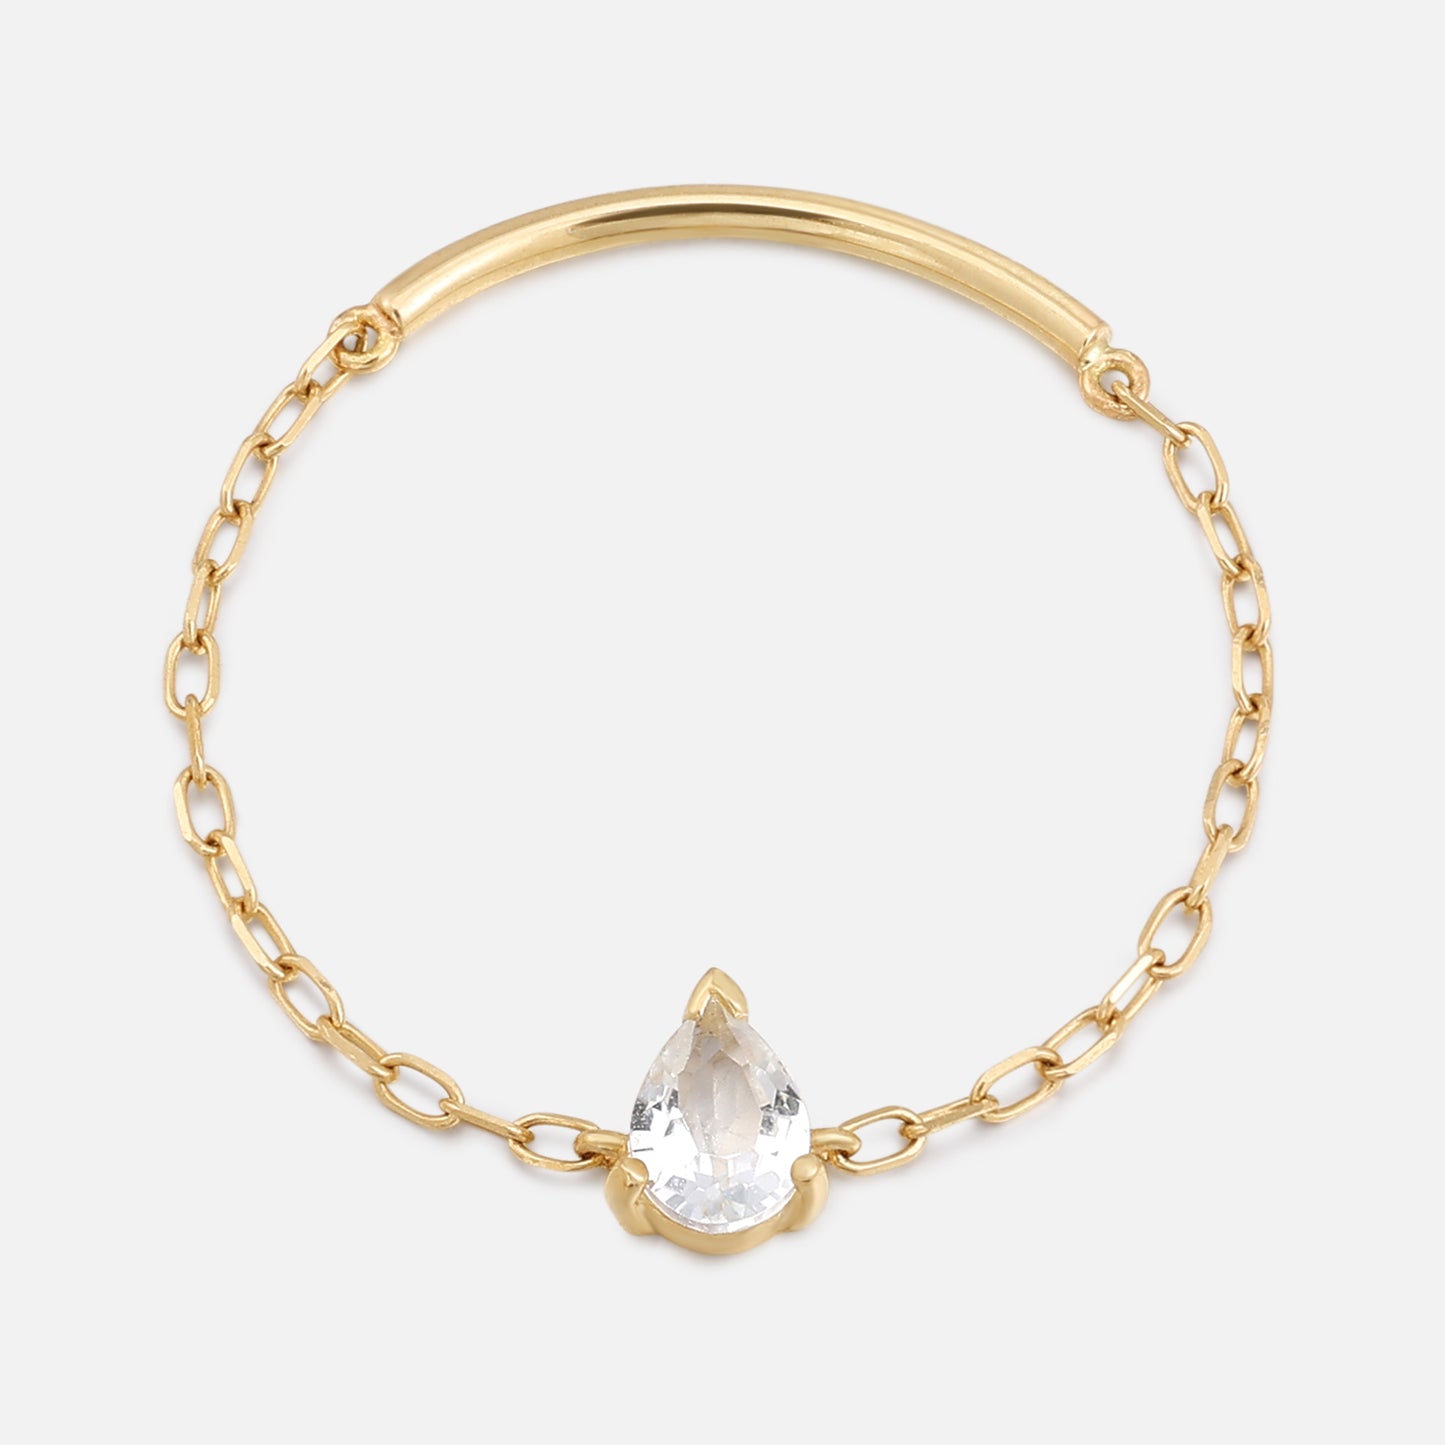 Solid Gold White Topaz Pear Chain Ring